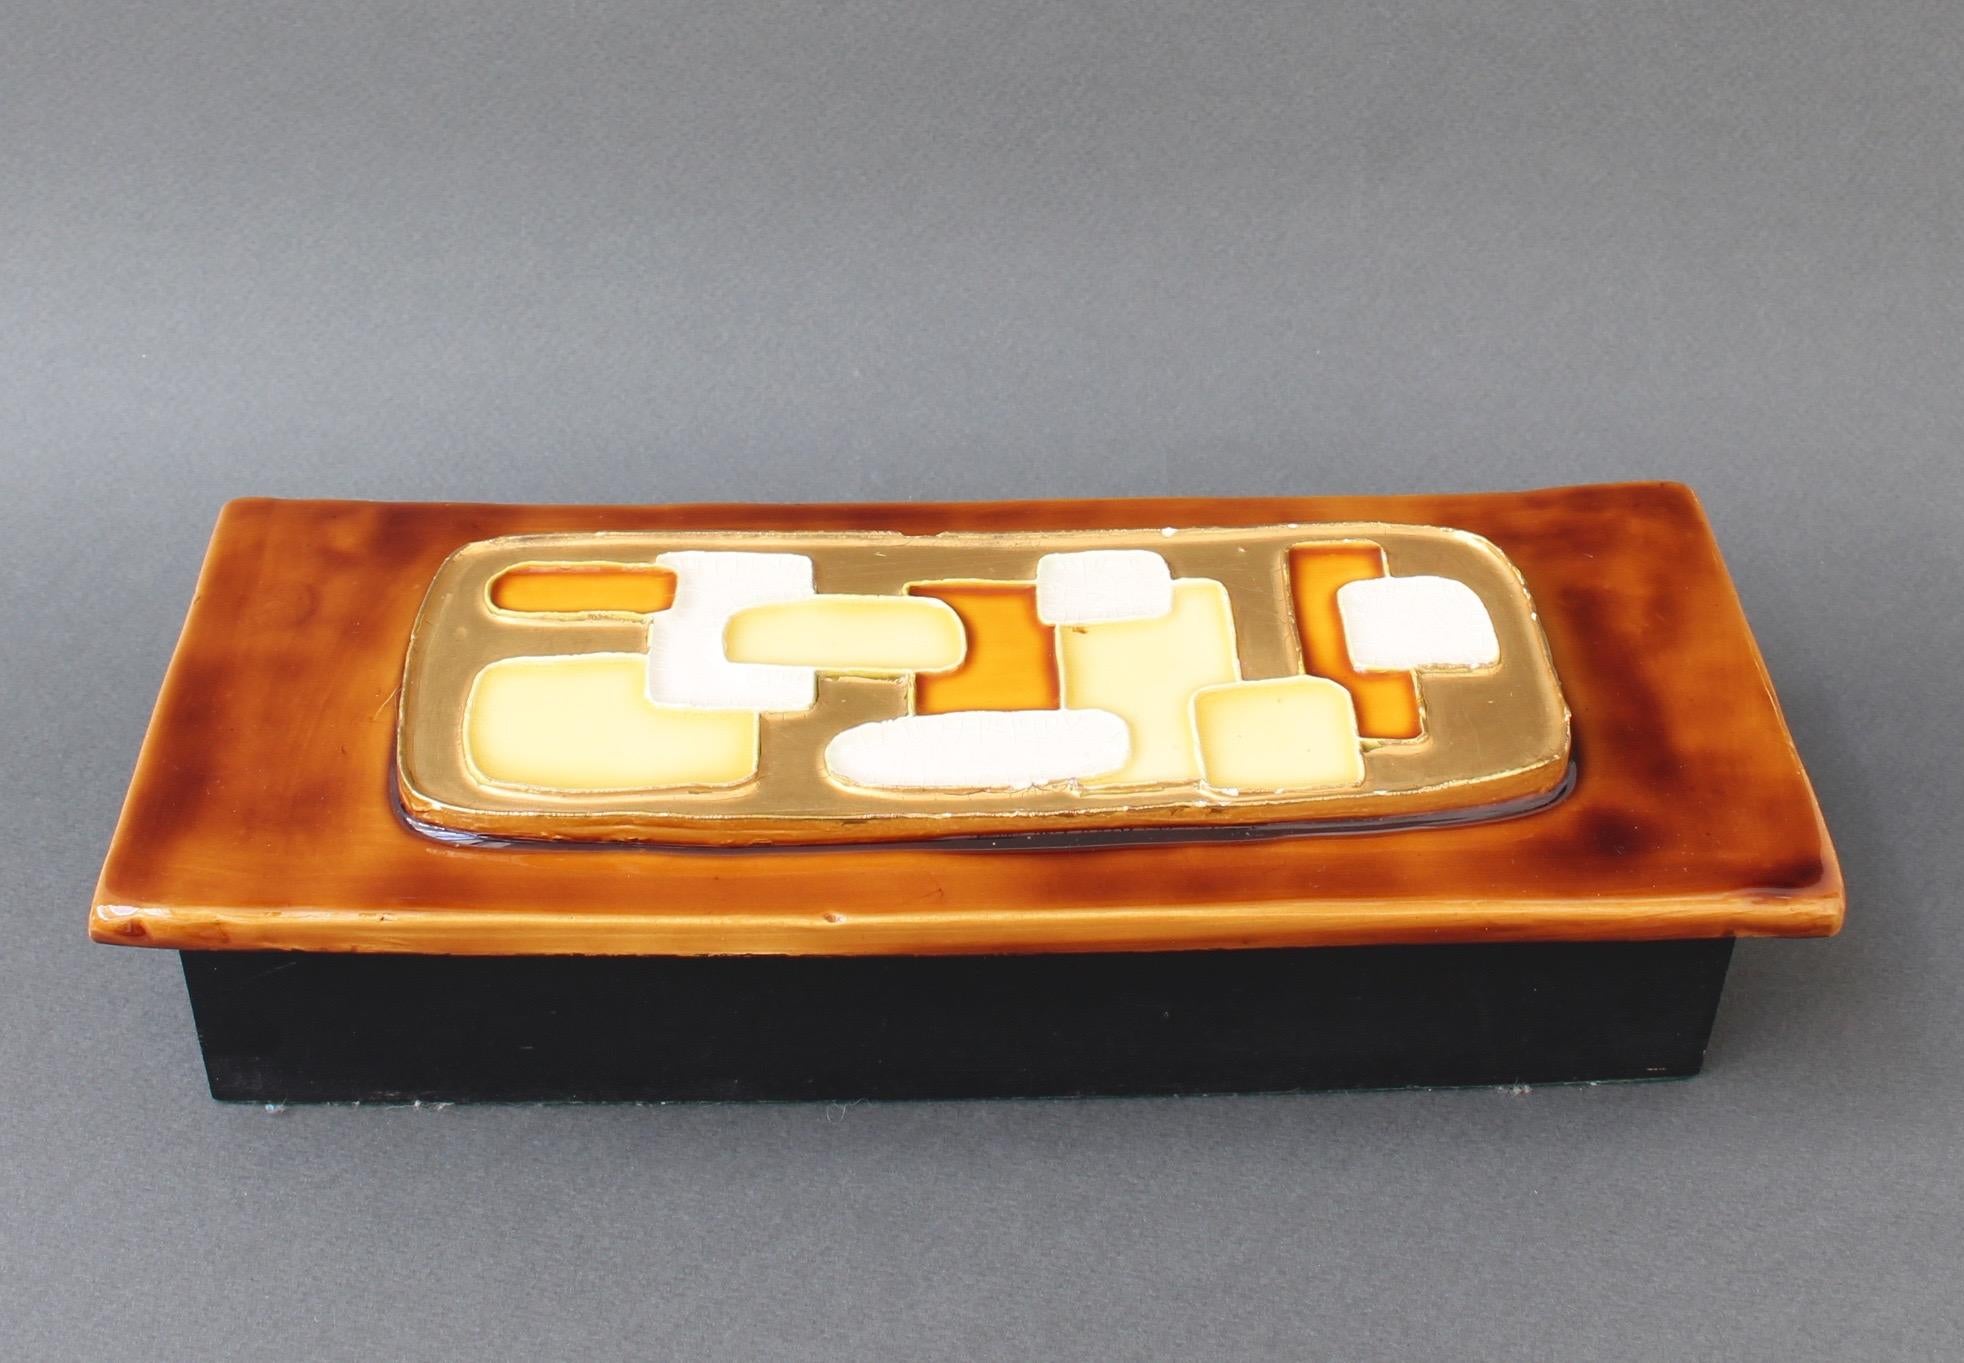 Jewellery box with decorative ceramic lid by Mithé Espelt (circa 1960s). Mid-century modern style raised abstract motif with yellow, white and caramel coloured geometric shapes imbedded in gold crackle (with small evident chip) over a glossy caramel